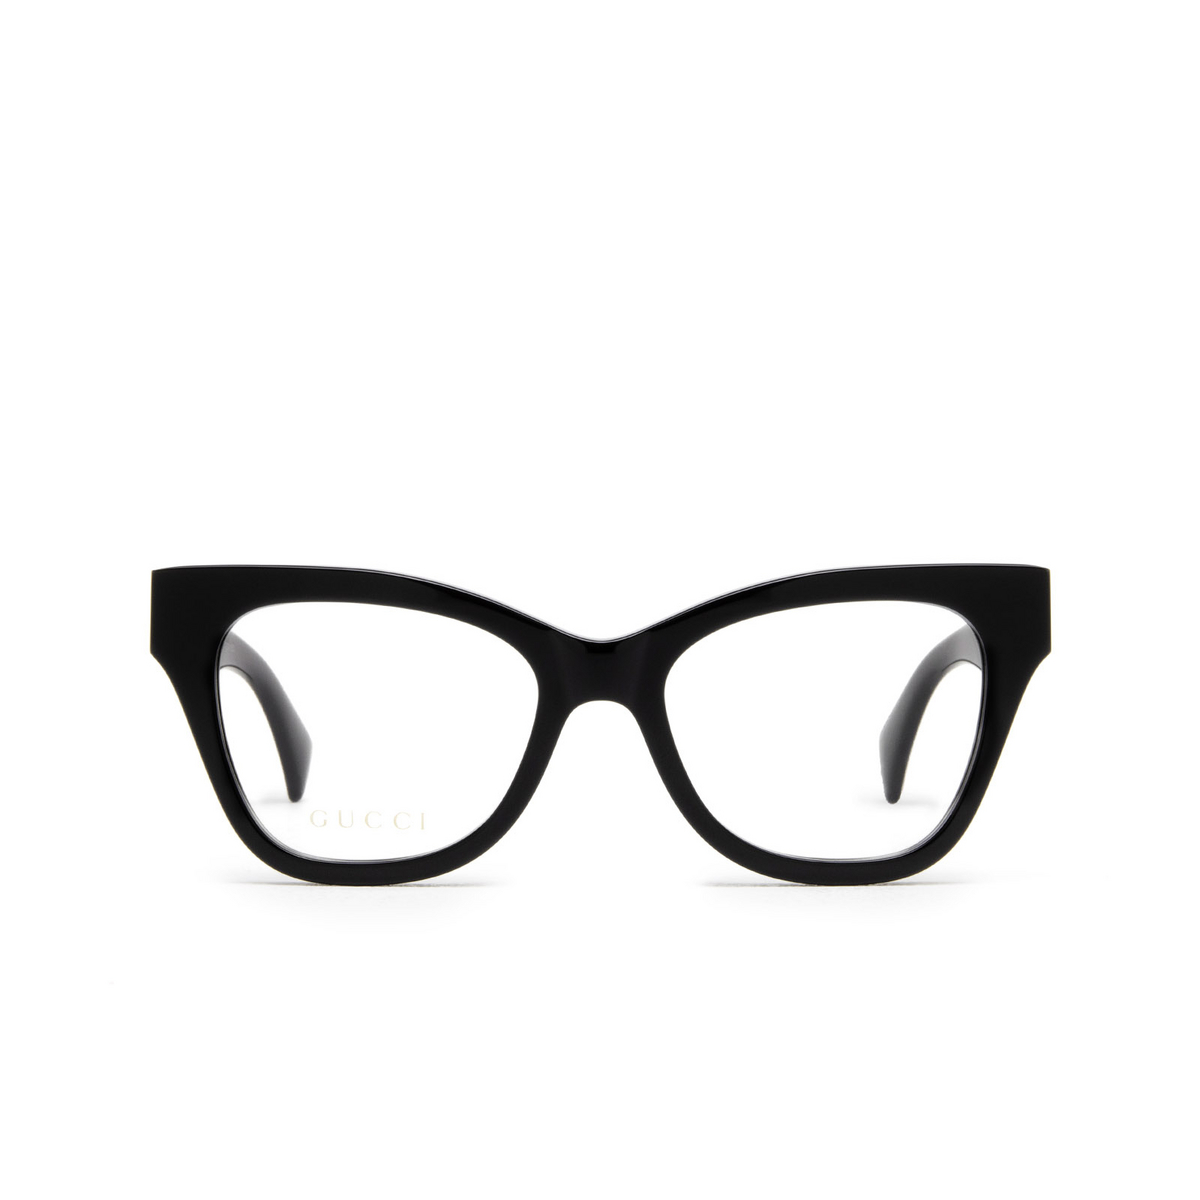 Gucci® Cat-eye Eyeglasses: GG1133O color Black 001 - front view.